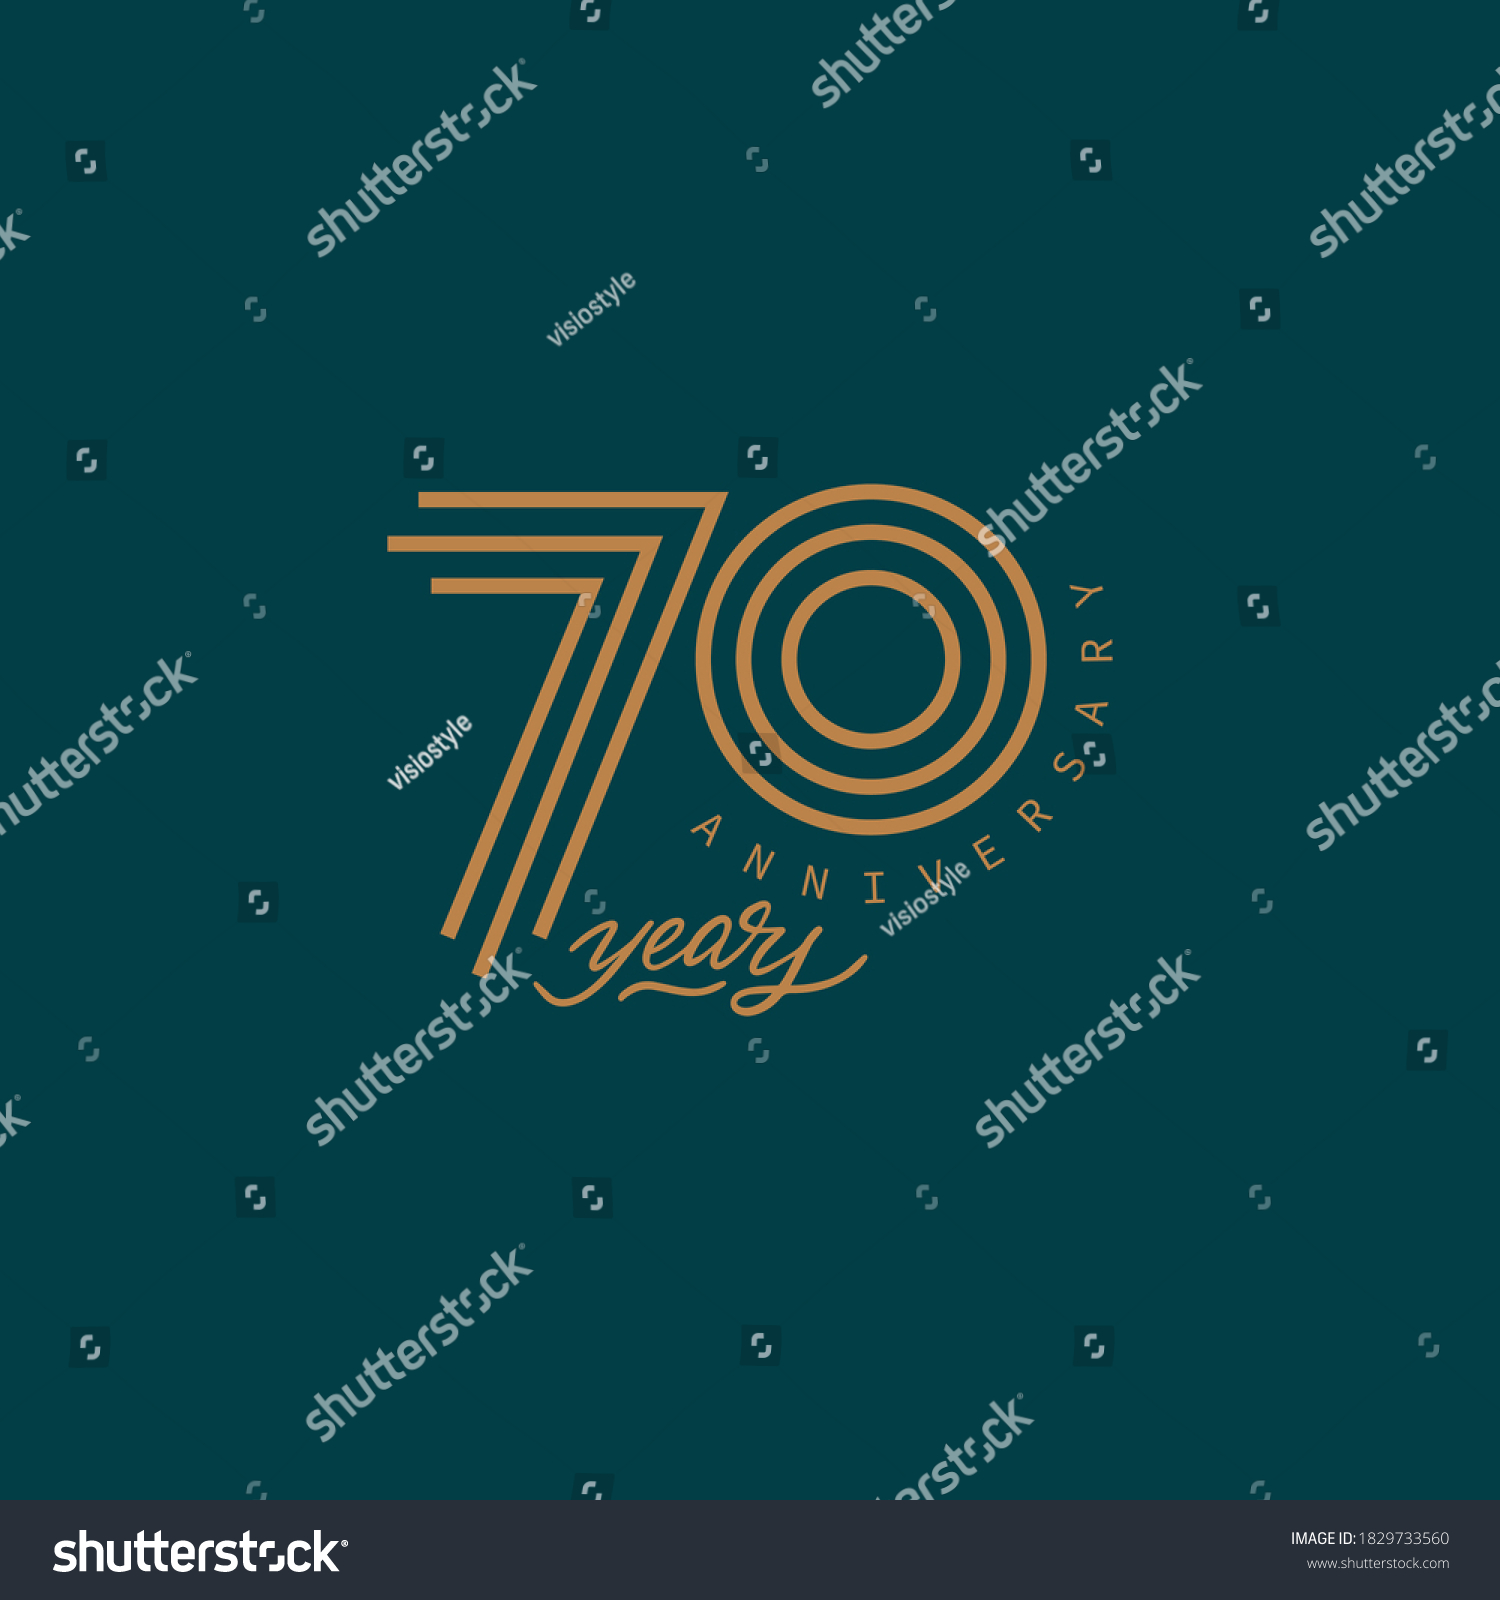 SVG of 70 years anniversary pictogram vector icon, 70th year birthday logo label. svg